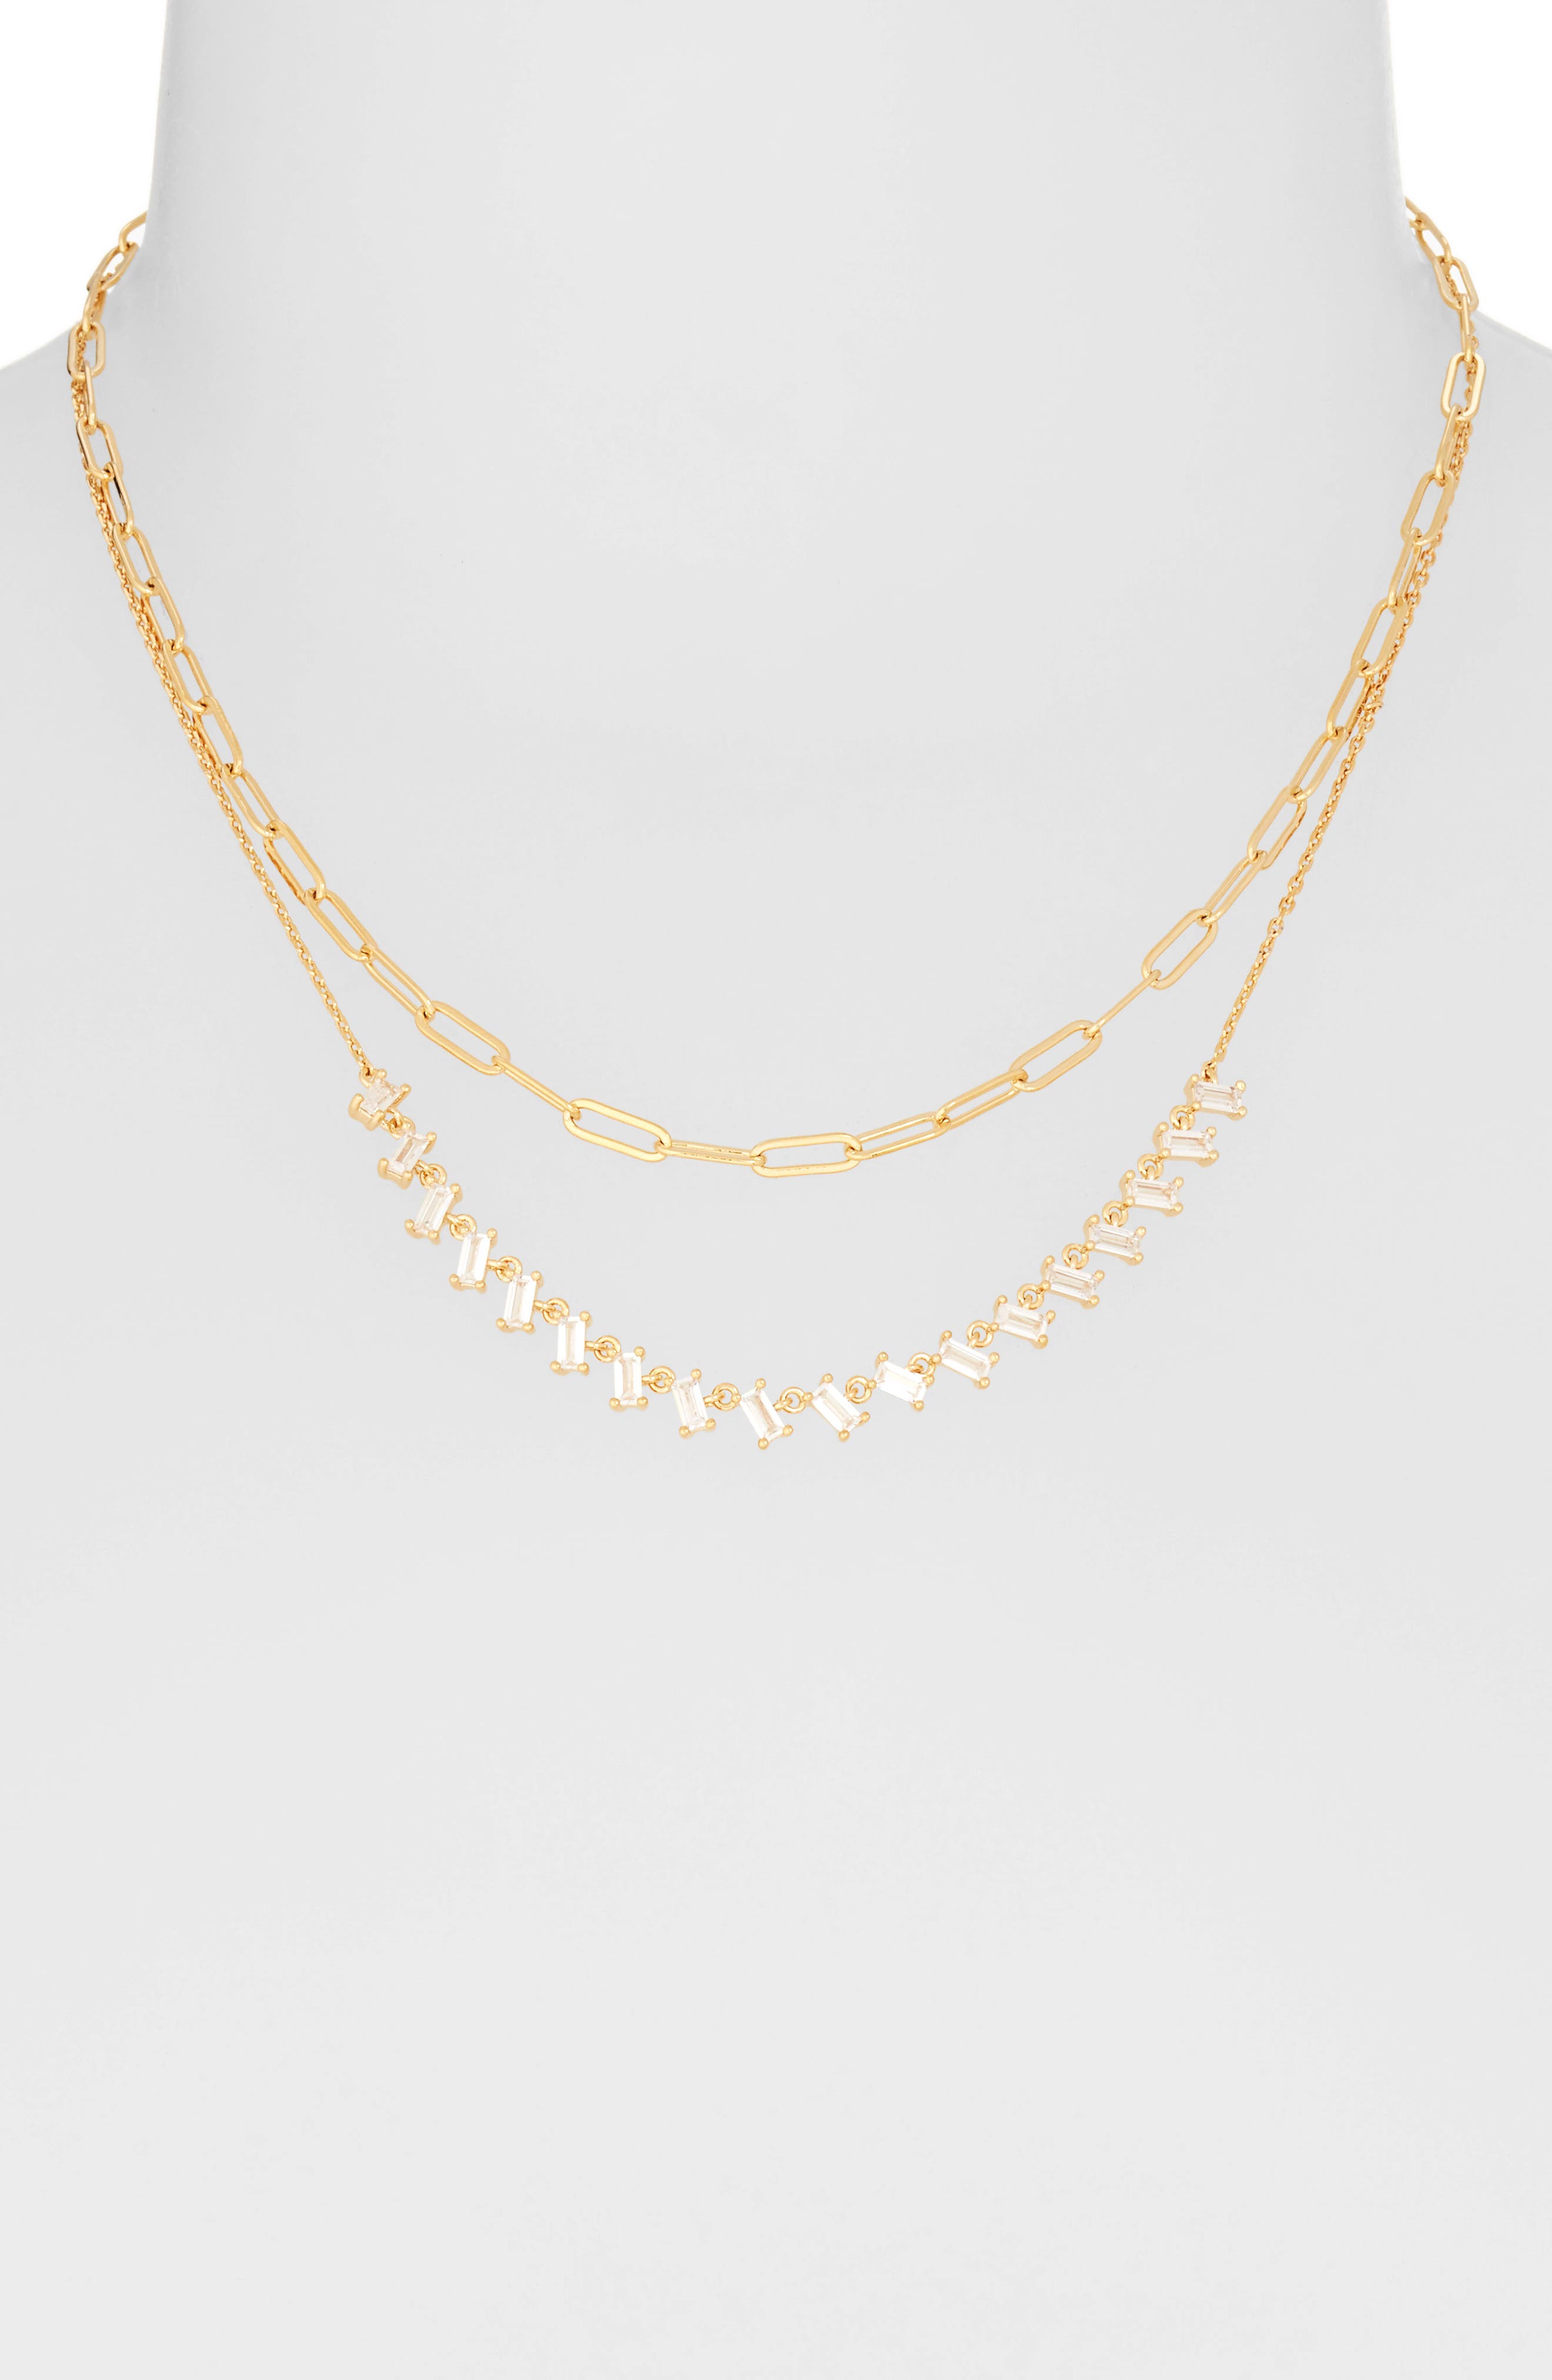 Cheline Gold Plated Silver Two Tone Beautiful Cocktail White Cz Necklace-17 